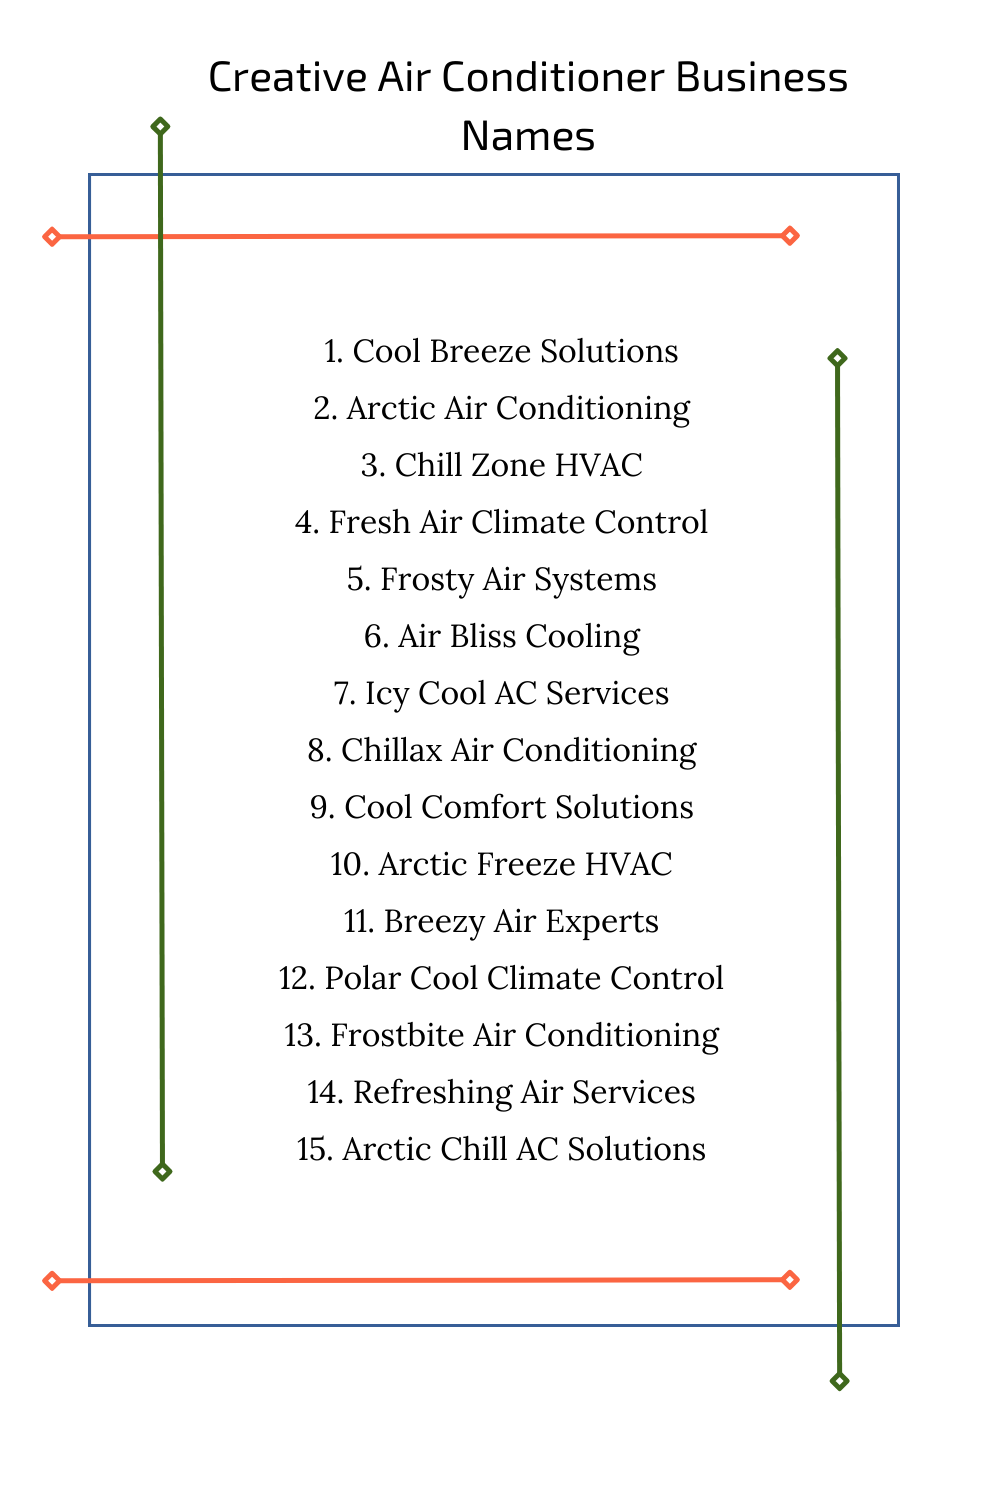 Creative Air Conditioner Business Names